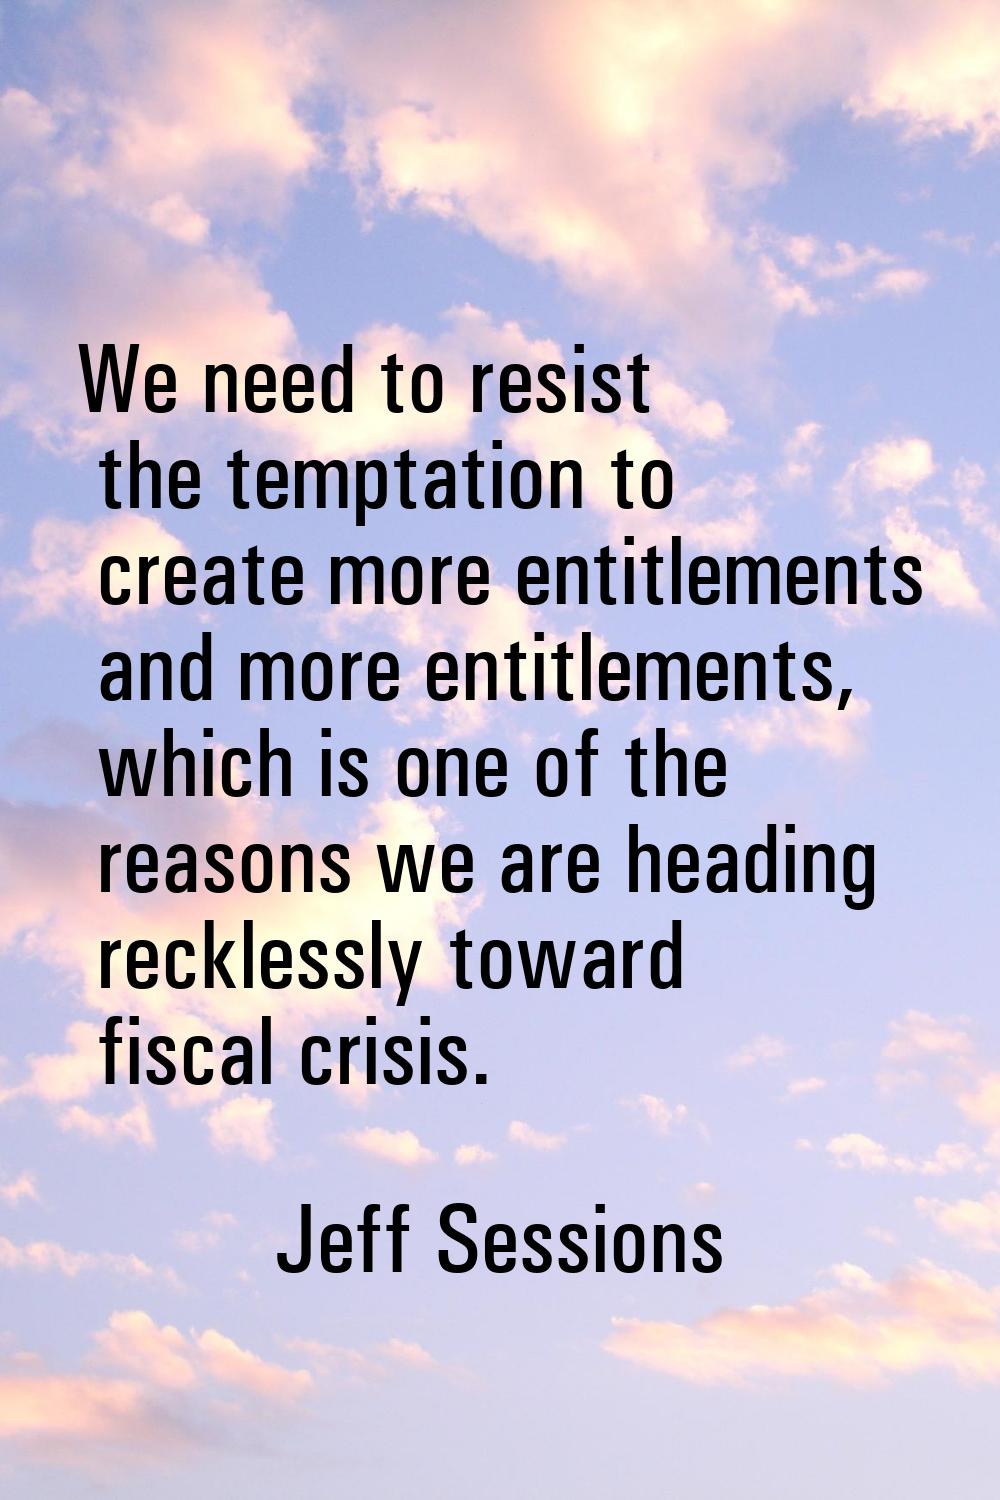 We need to resist the temptation to create more entitlements and more entitlements, which is one of